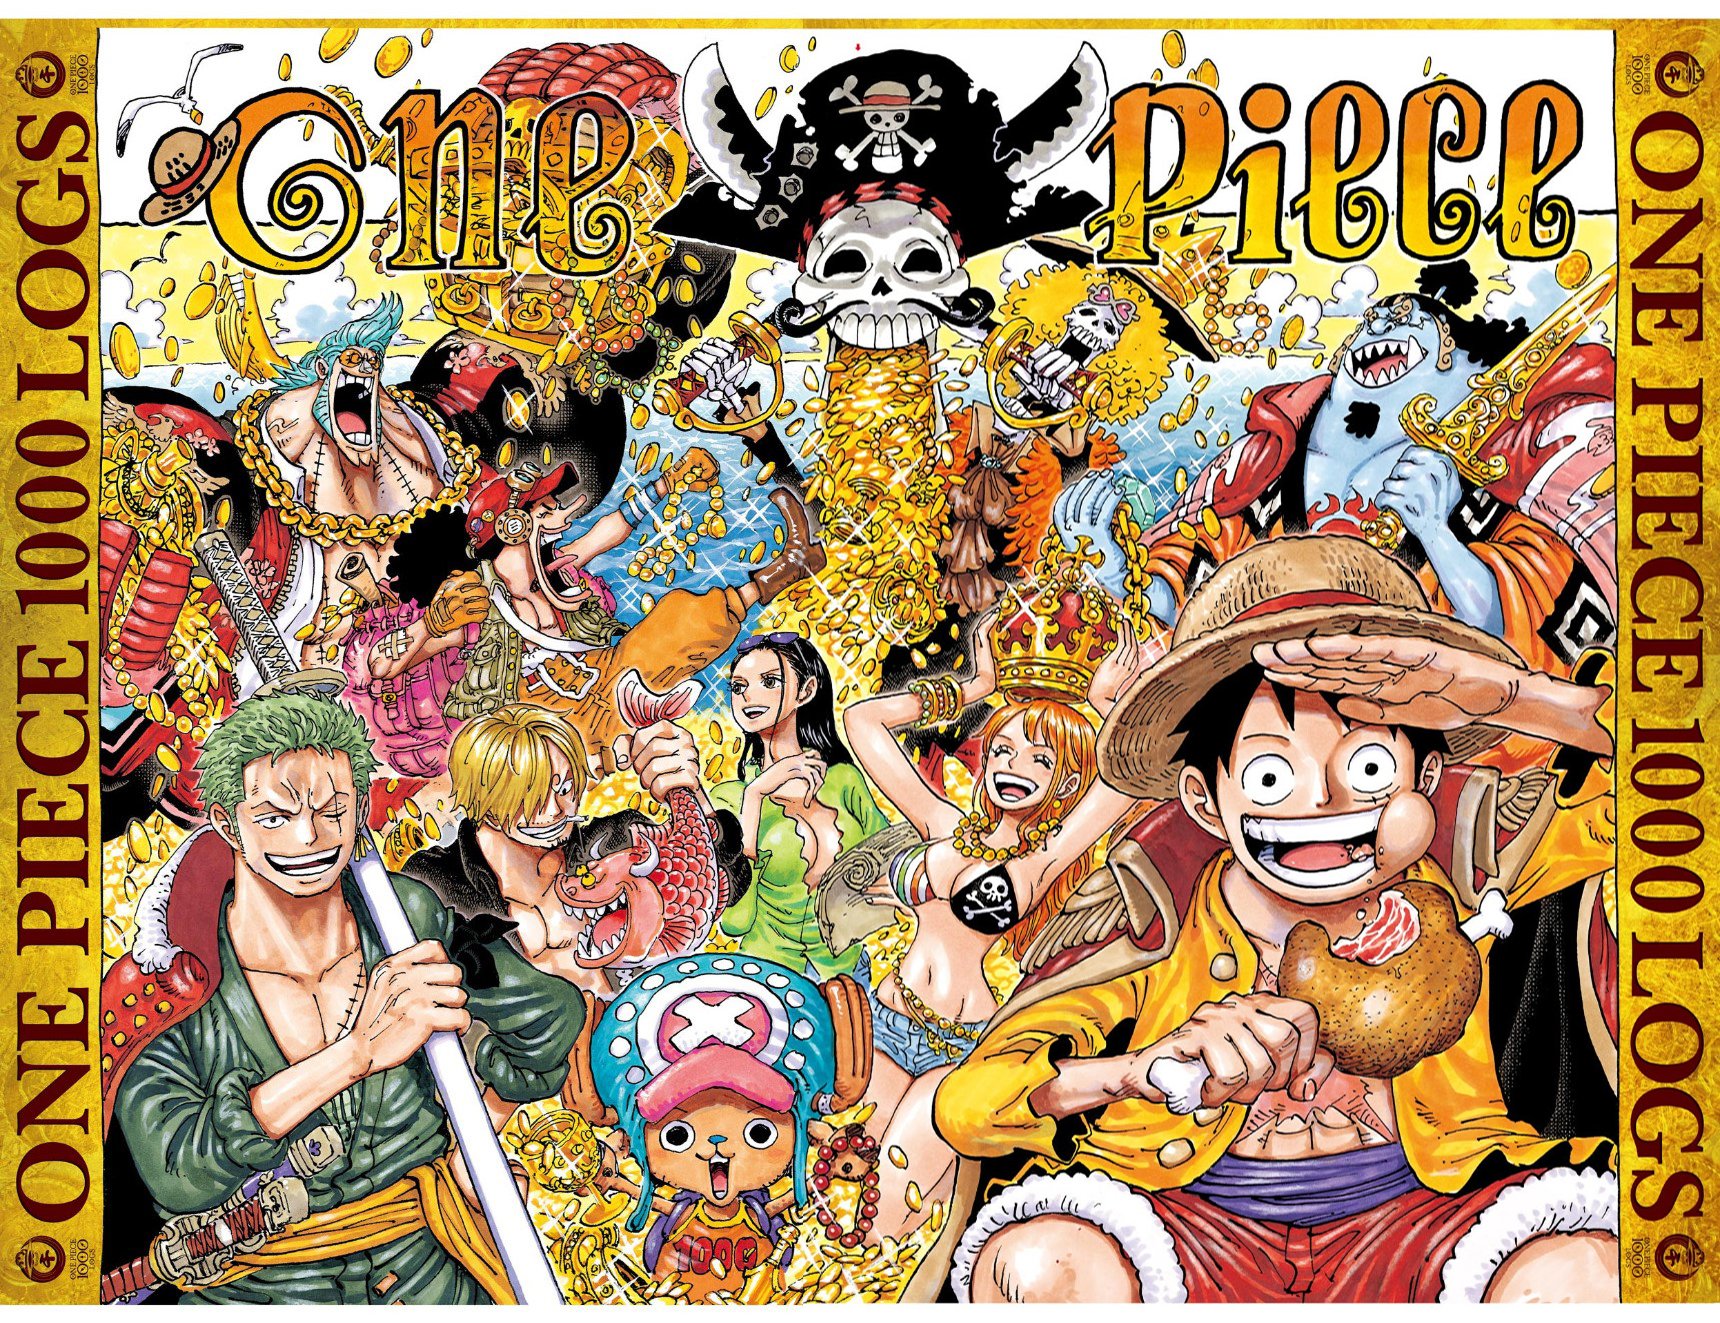 Shonen Jump News Unofficial One Piece Joint Covers And Poster For Issues 3 4 And 5 6 T Co Ikfznuwjcc Twitter